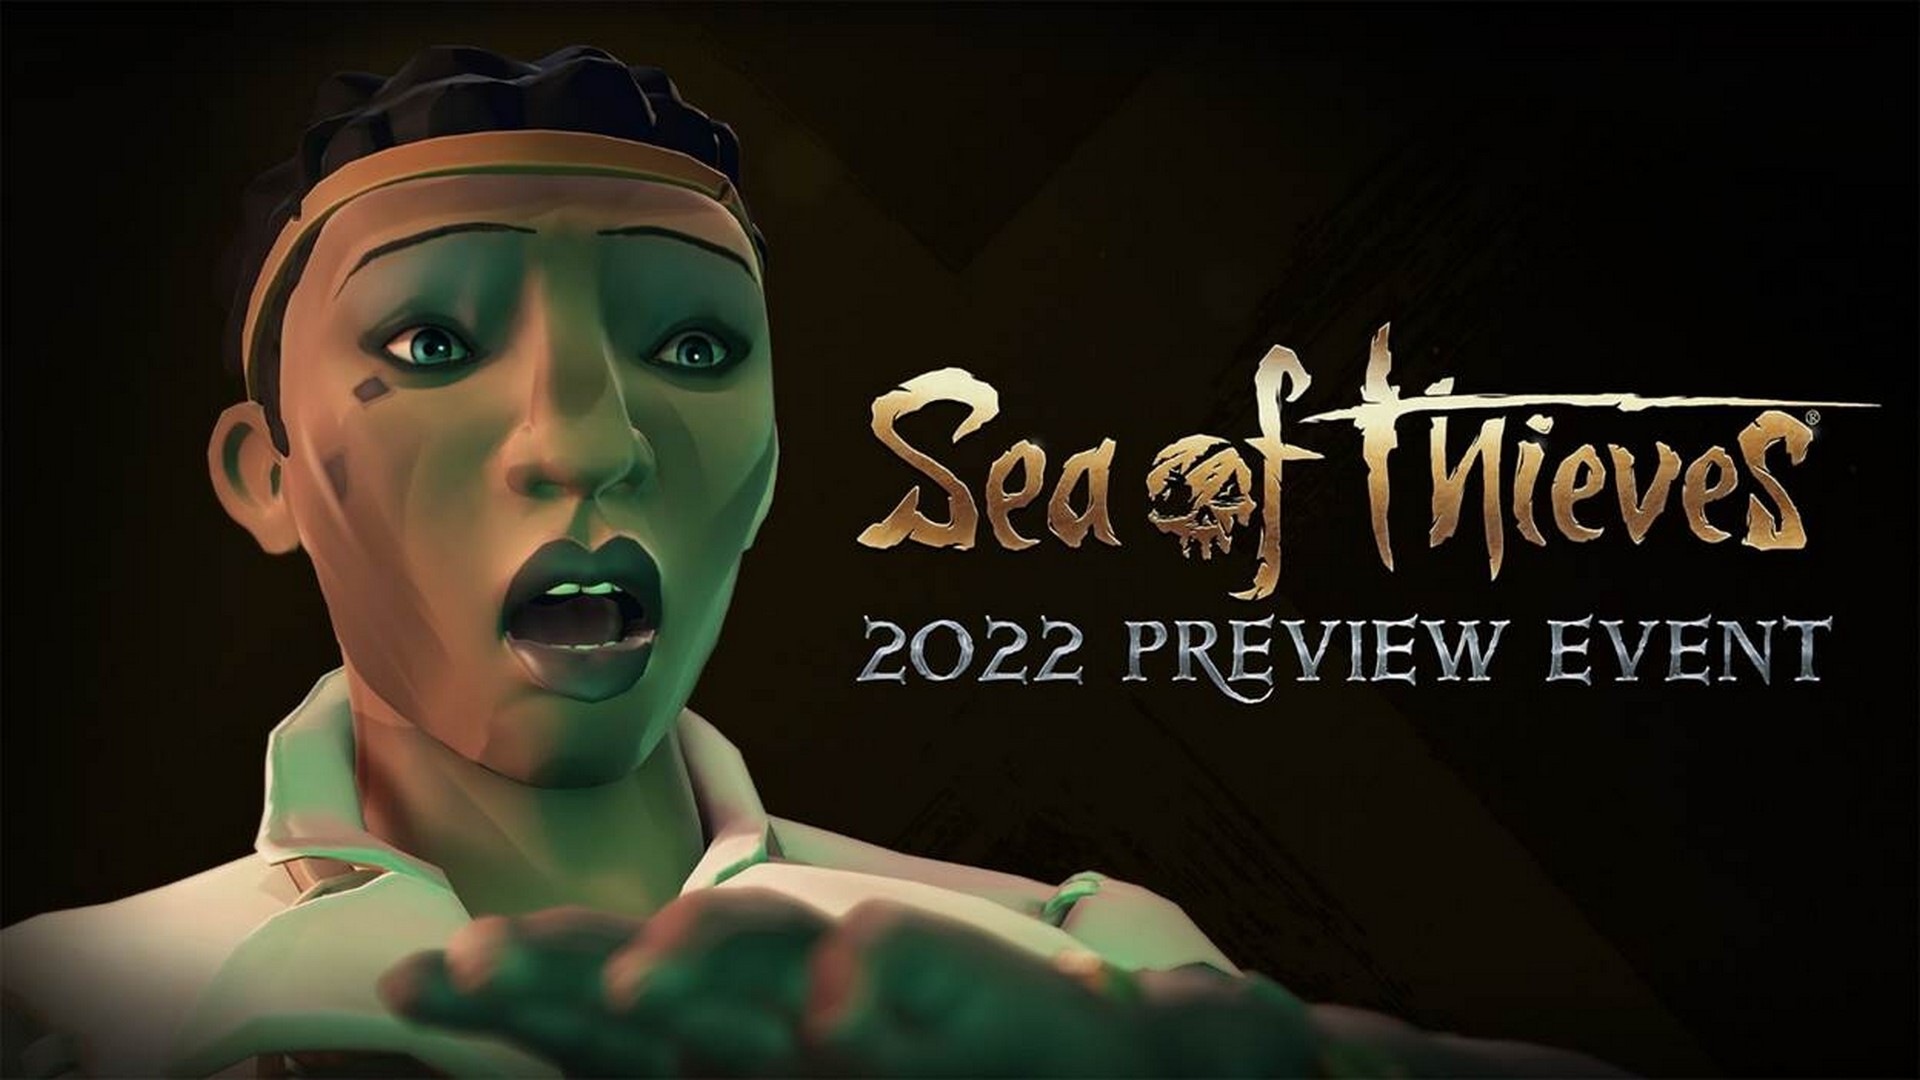 Explore The Future Of Sea of Thieves In A Special 2022 Preview Event By Joe Neate, Executive Producer, Rare